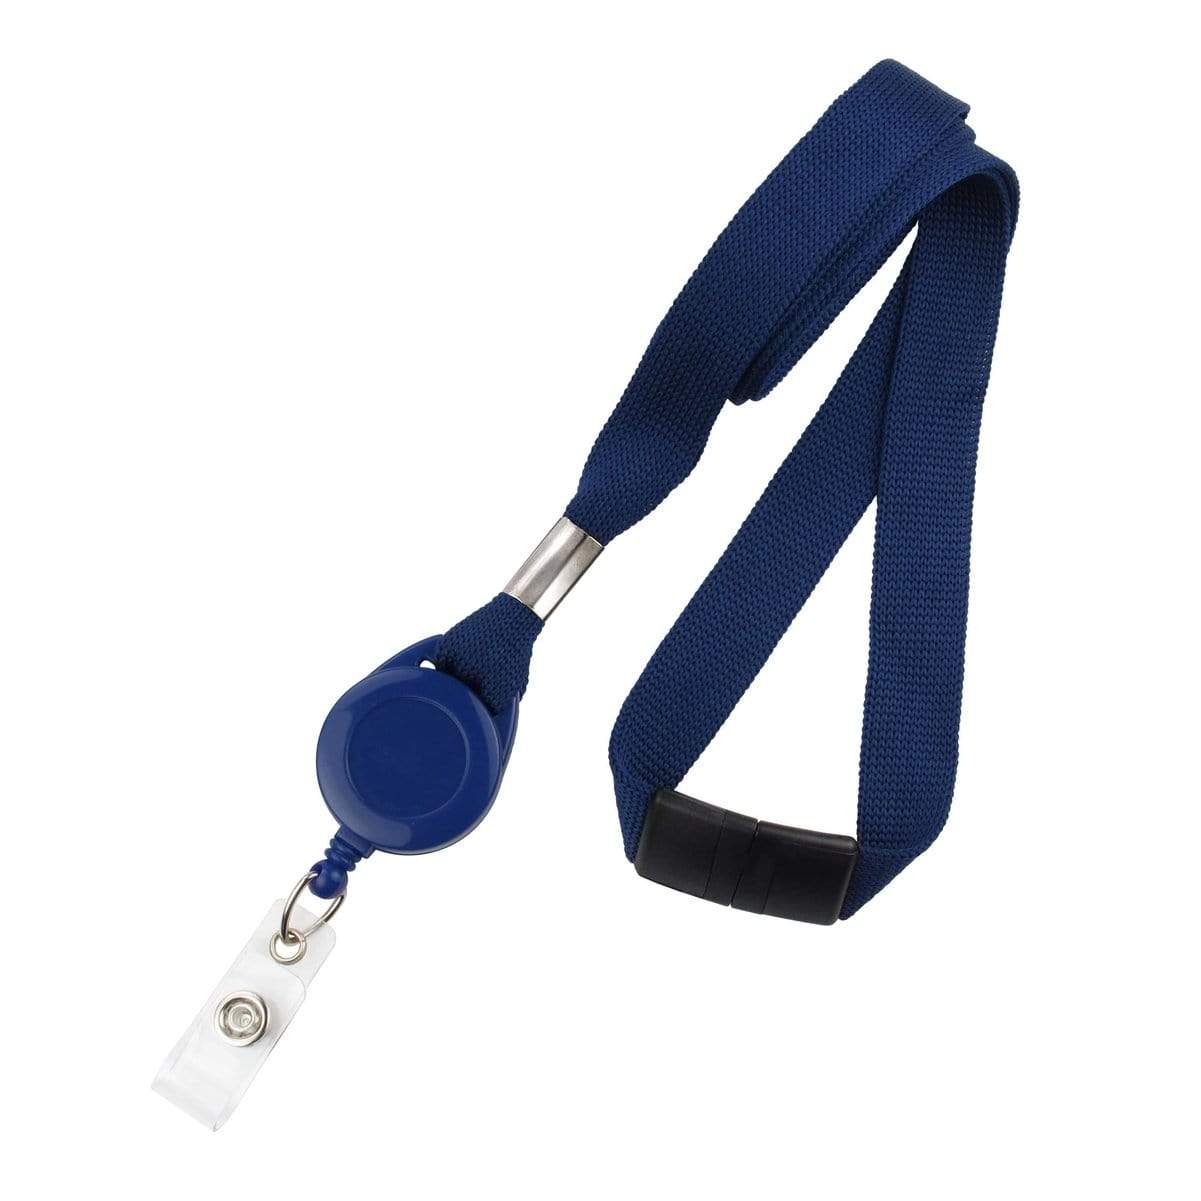 Specialist ID Navy Blue Badge Reel and Breakaway Lanyard Combo, Packaged and Sold Individually